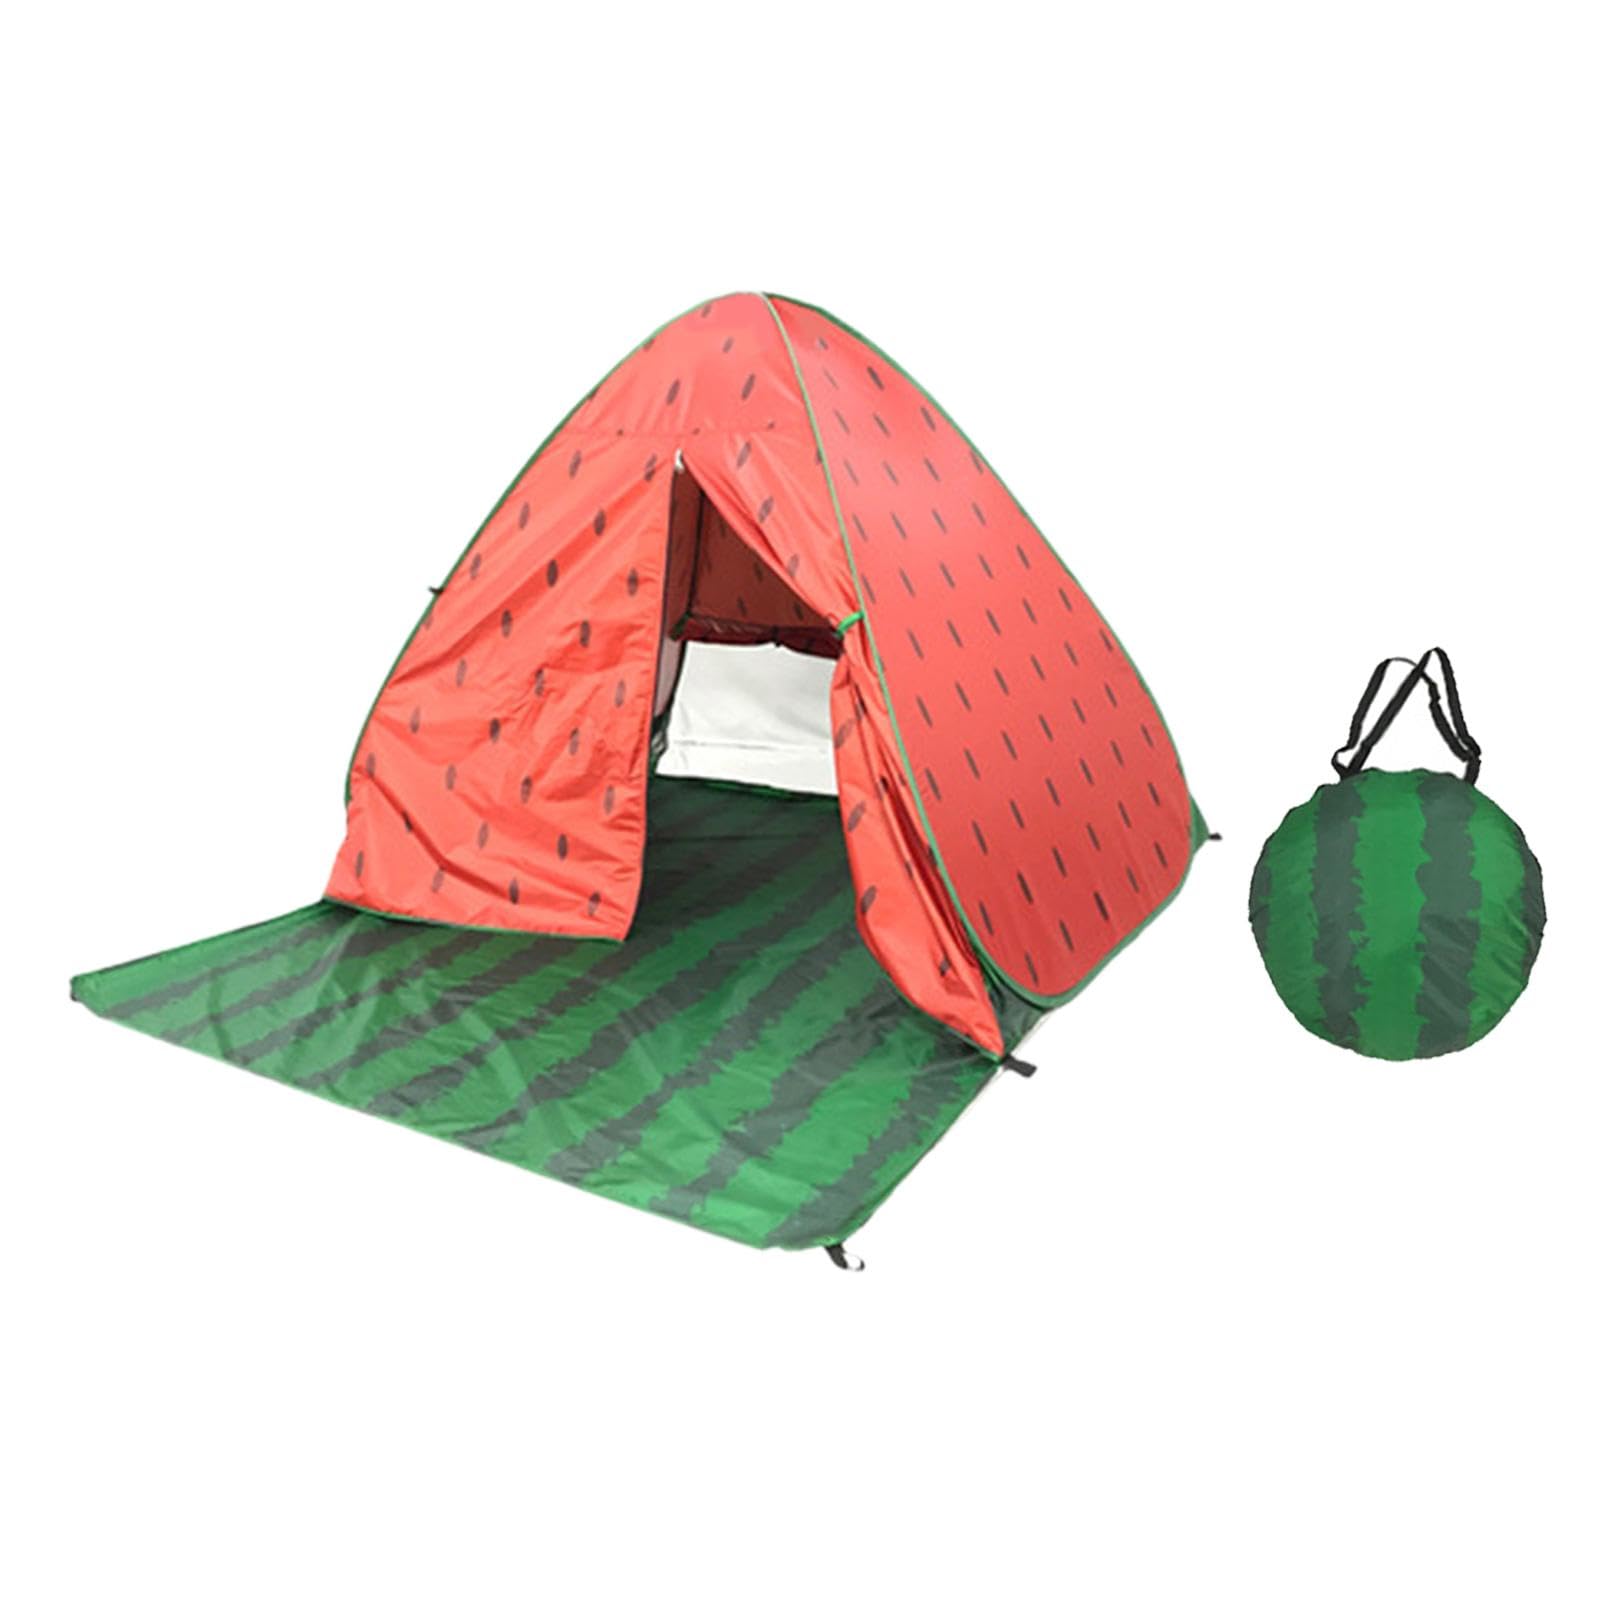 Esquirla Pop up Tent Beach Tent with Carry Bag Easy Setup Sun Protection Sun Shelter Camping Tent for Beach Outdoor Activitie